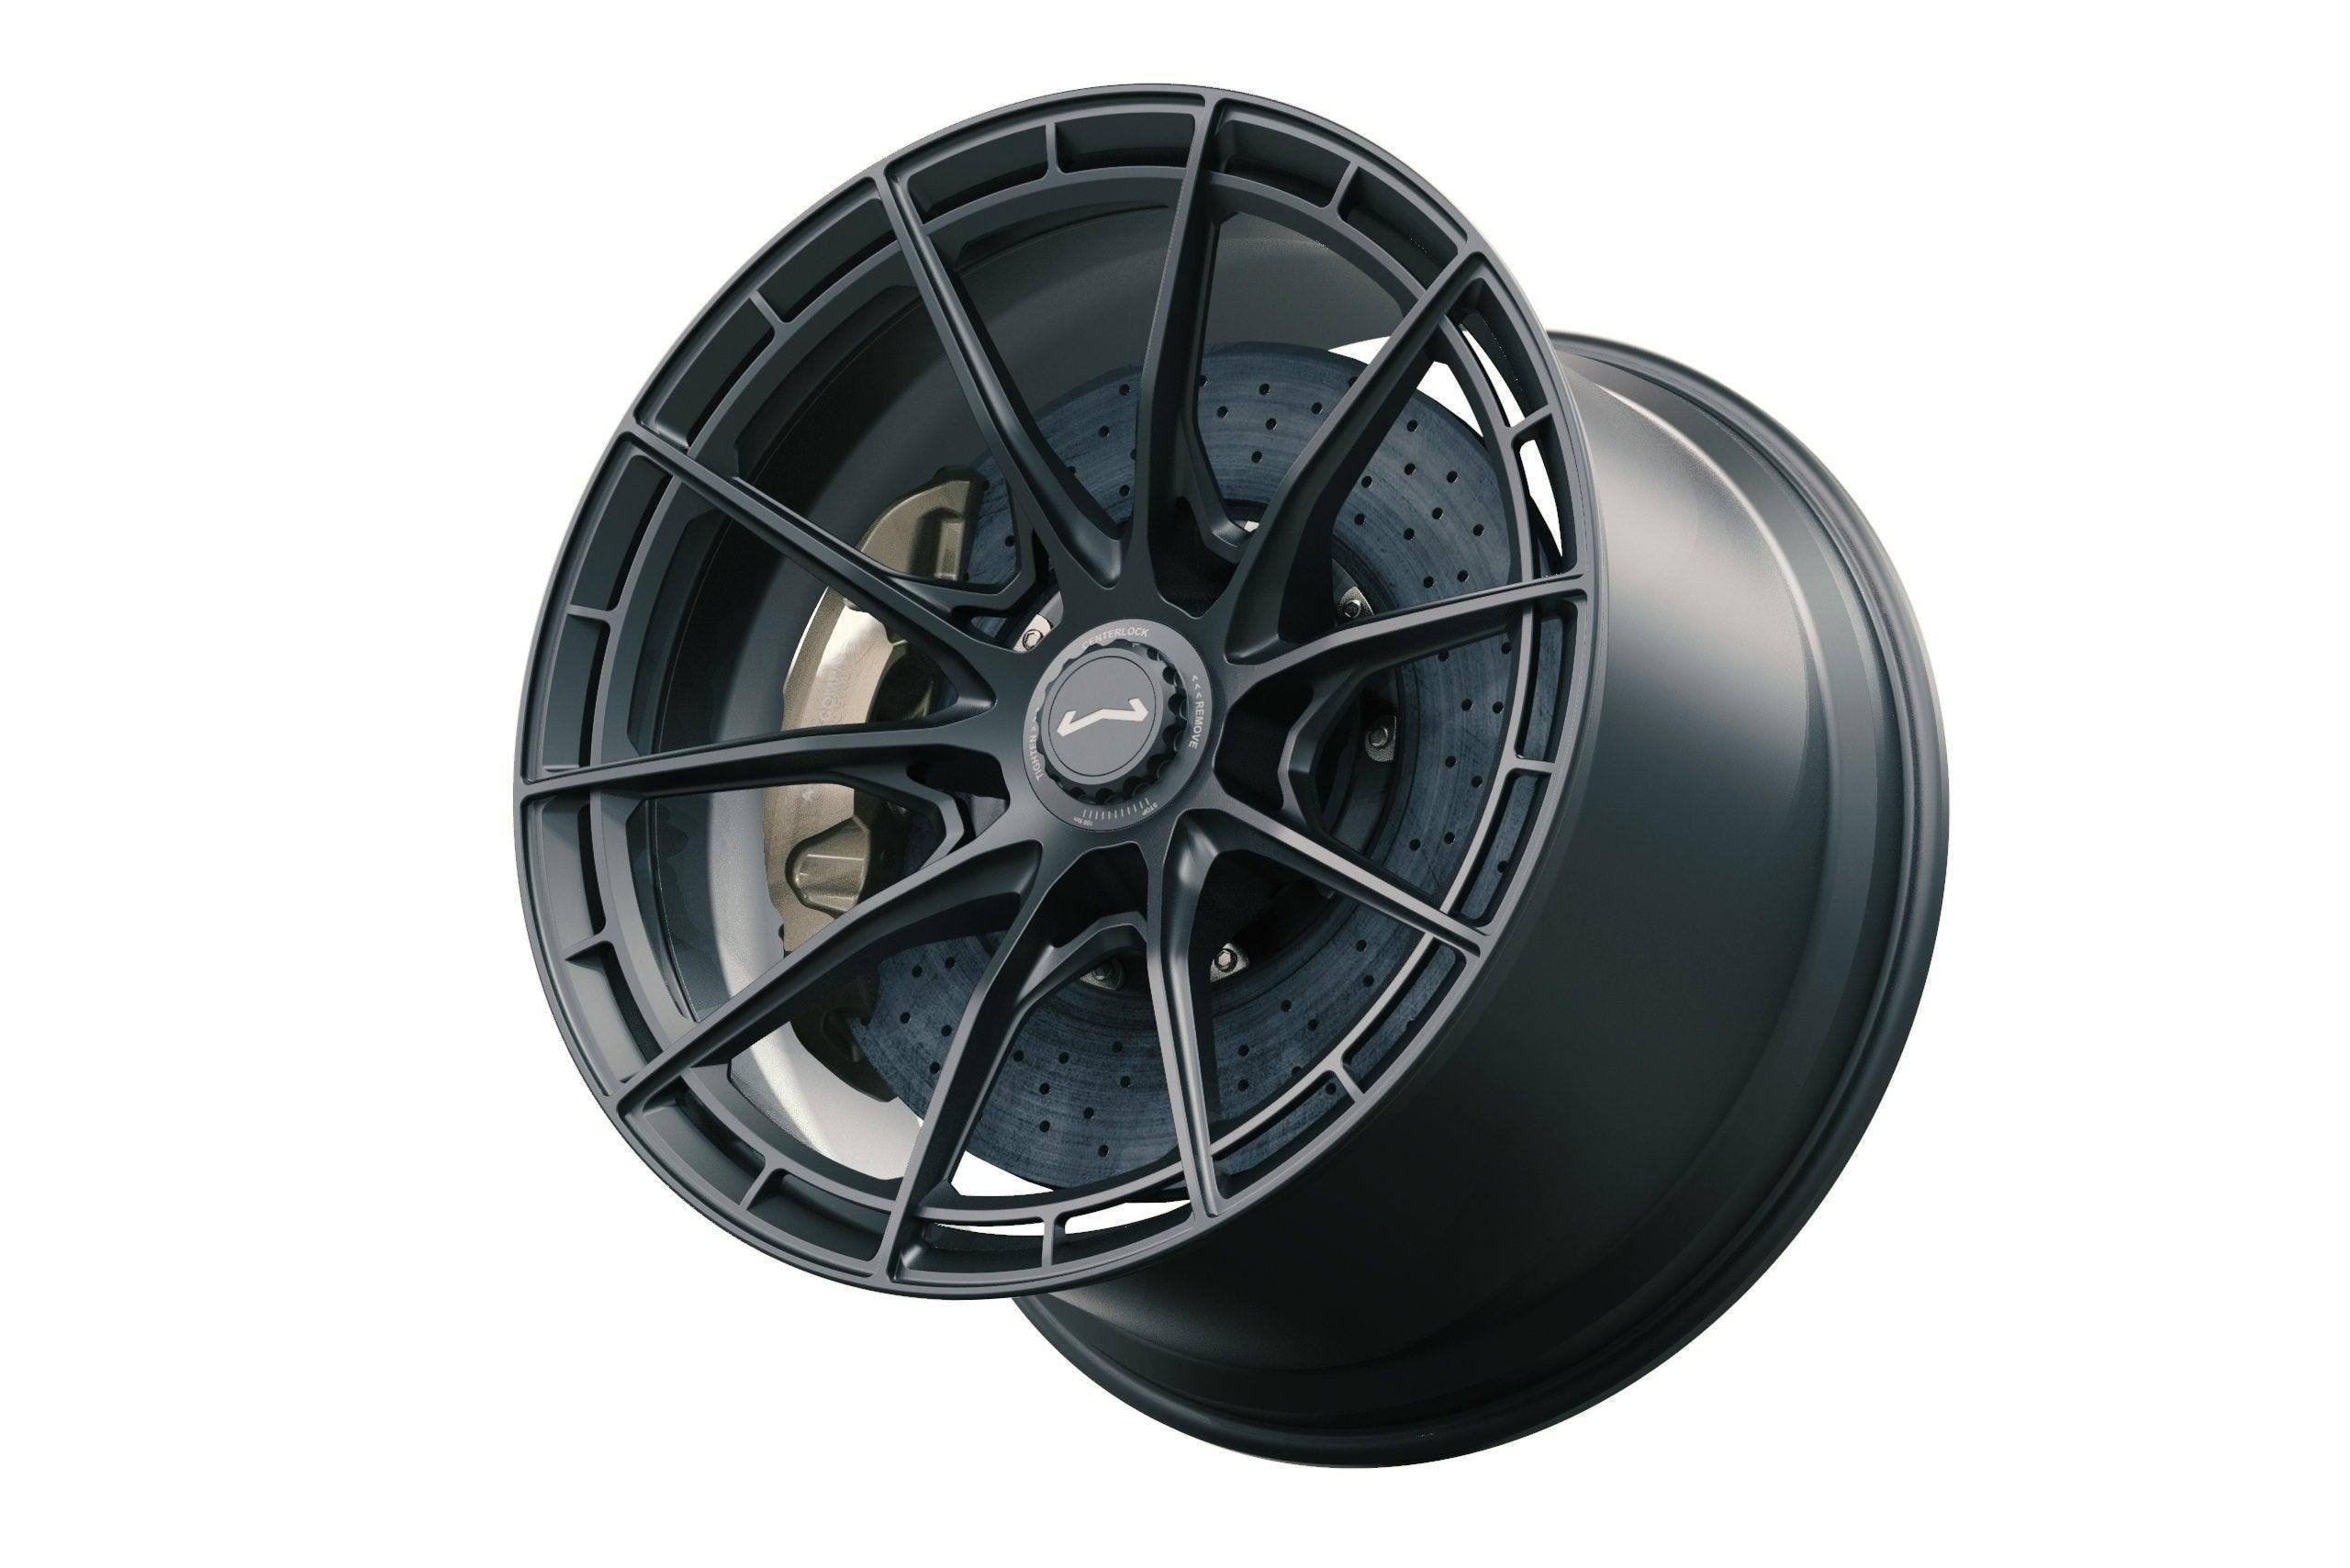 Dillinger AX1 L Forged Wheels, Forged Wheels, Dillinger Wheels - AUTOID | Premium Automotive Accessories